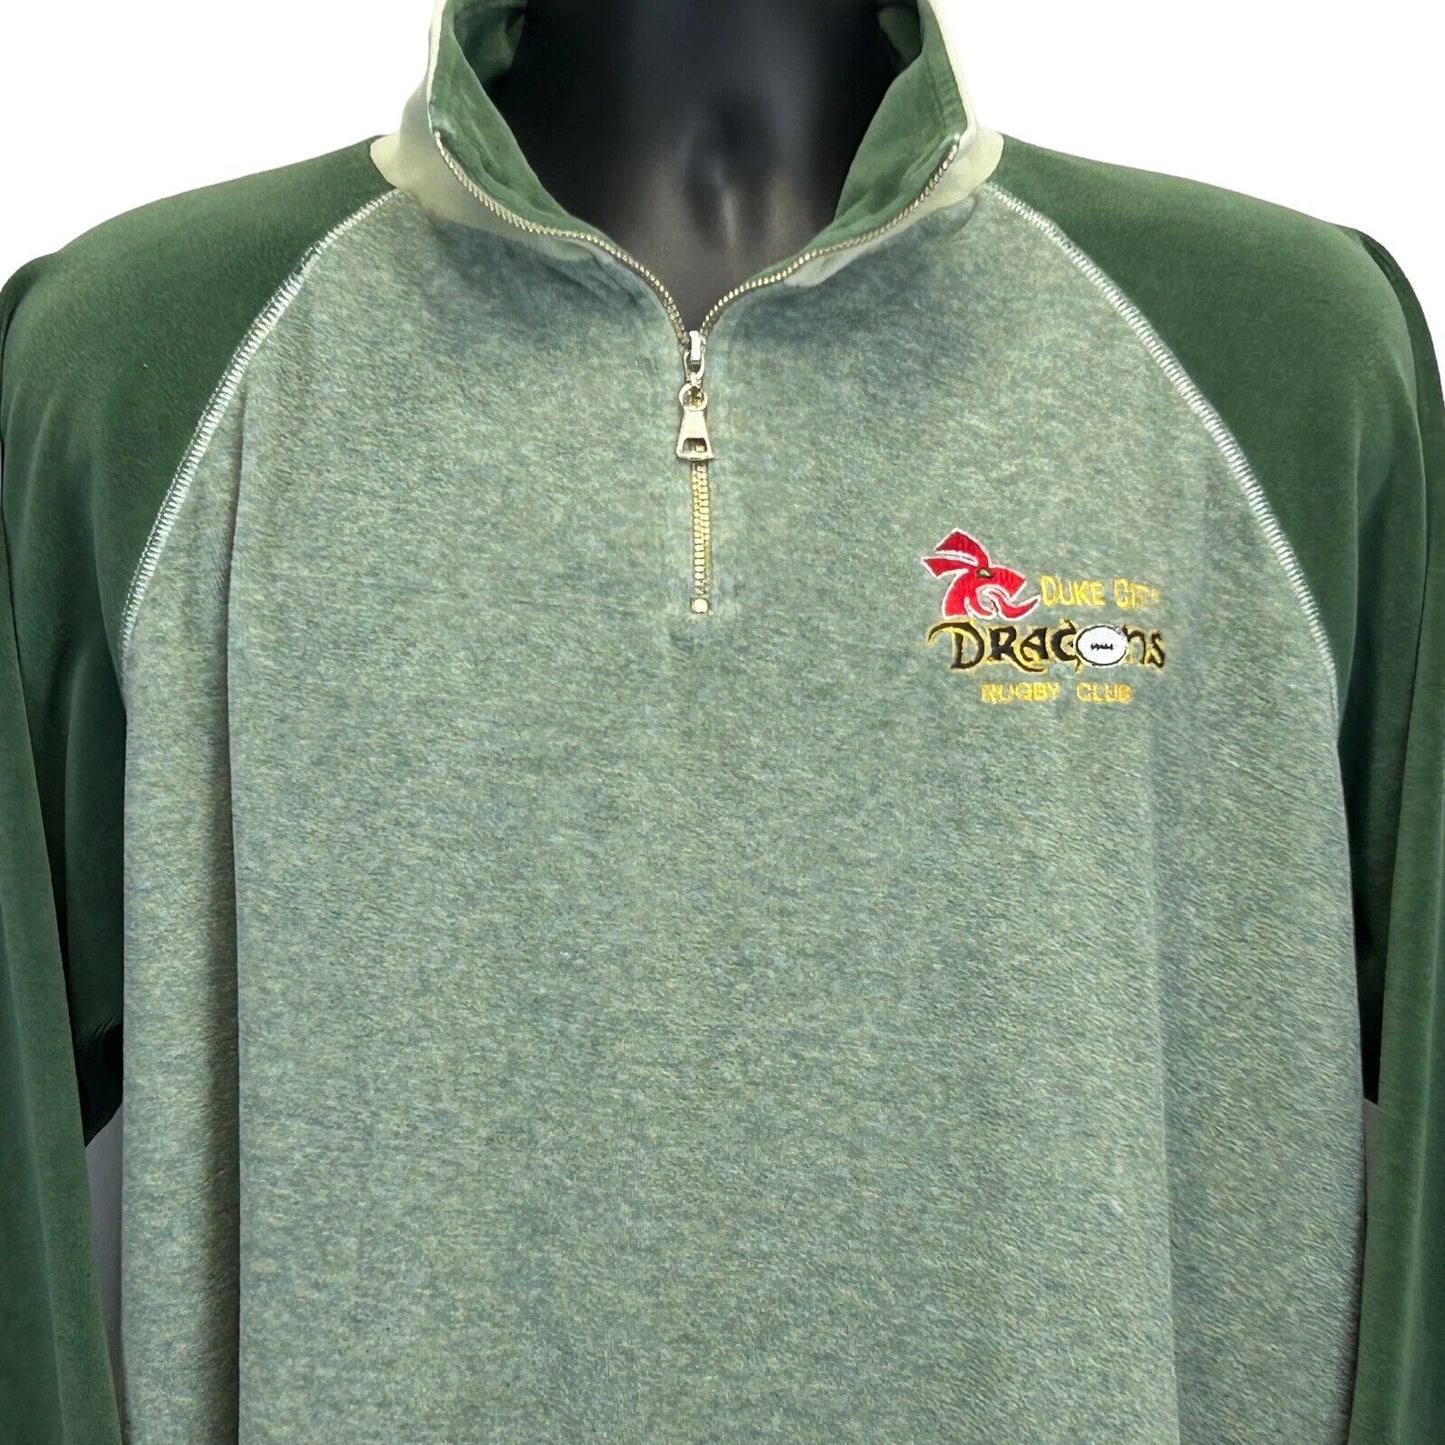 Duke City Dragons Rugby Club Sweater Vintage 90s X-Large Albuquerque Mens Green